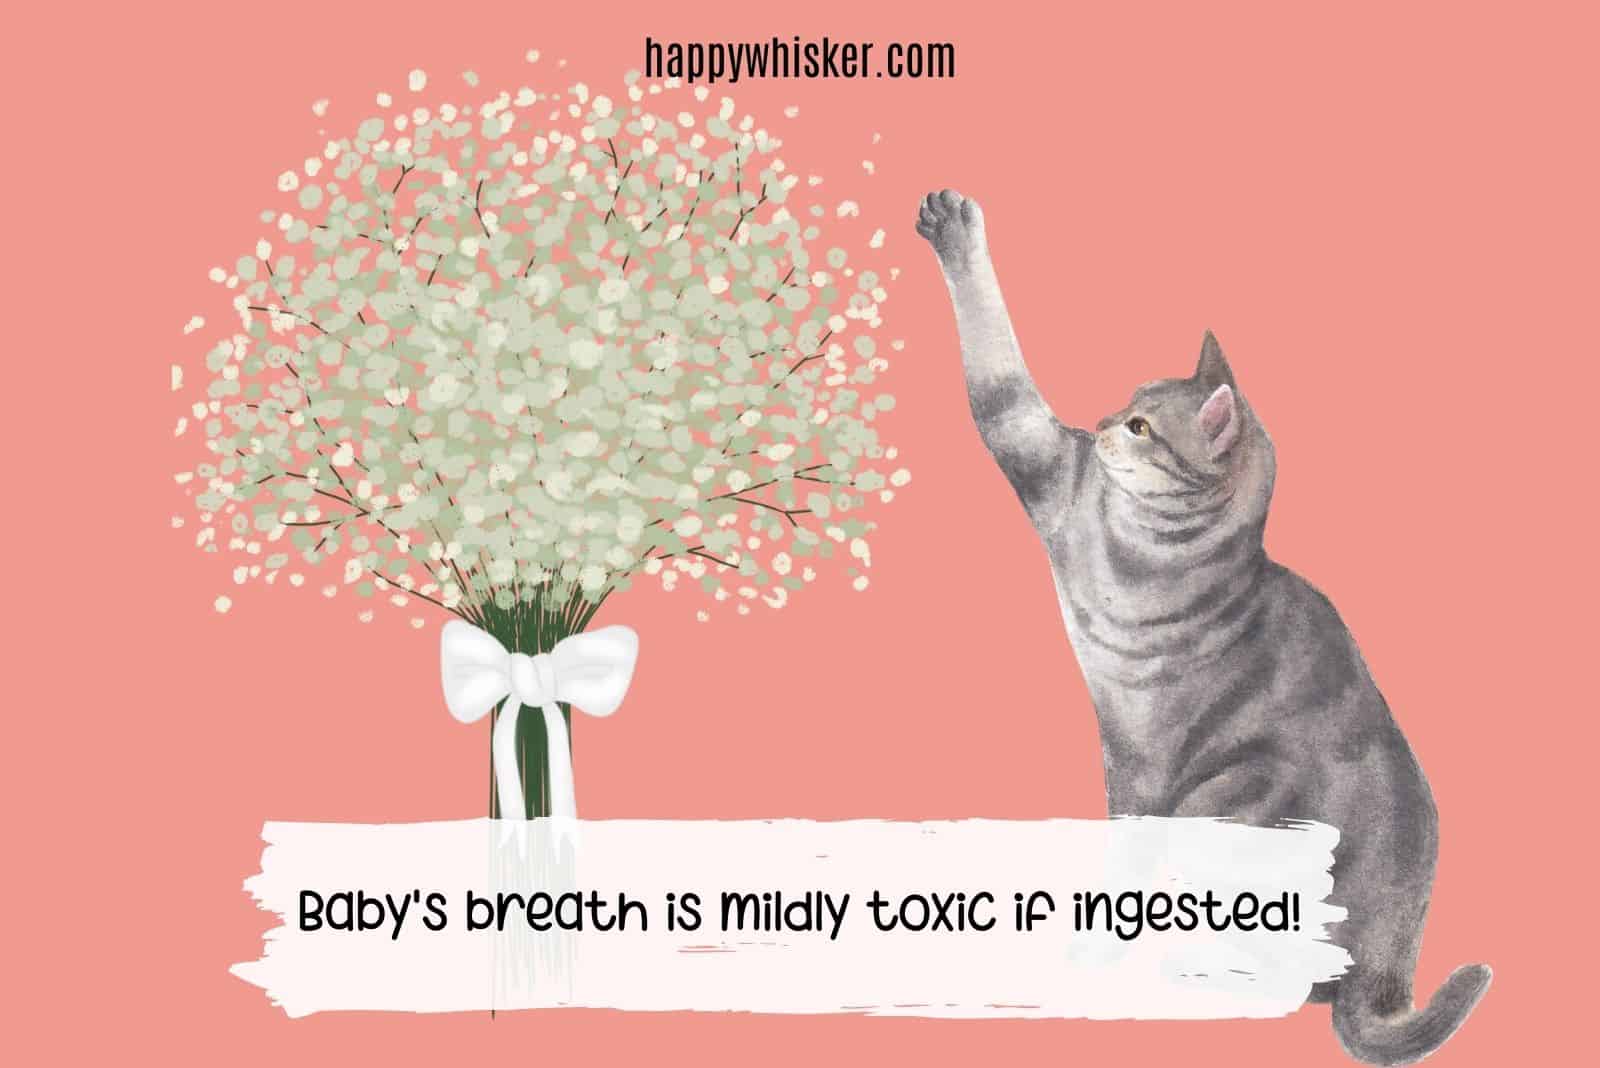 baby's breath, a mildly toxic fower for cats